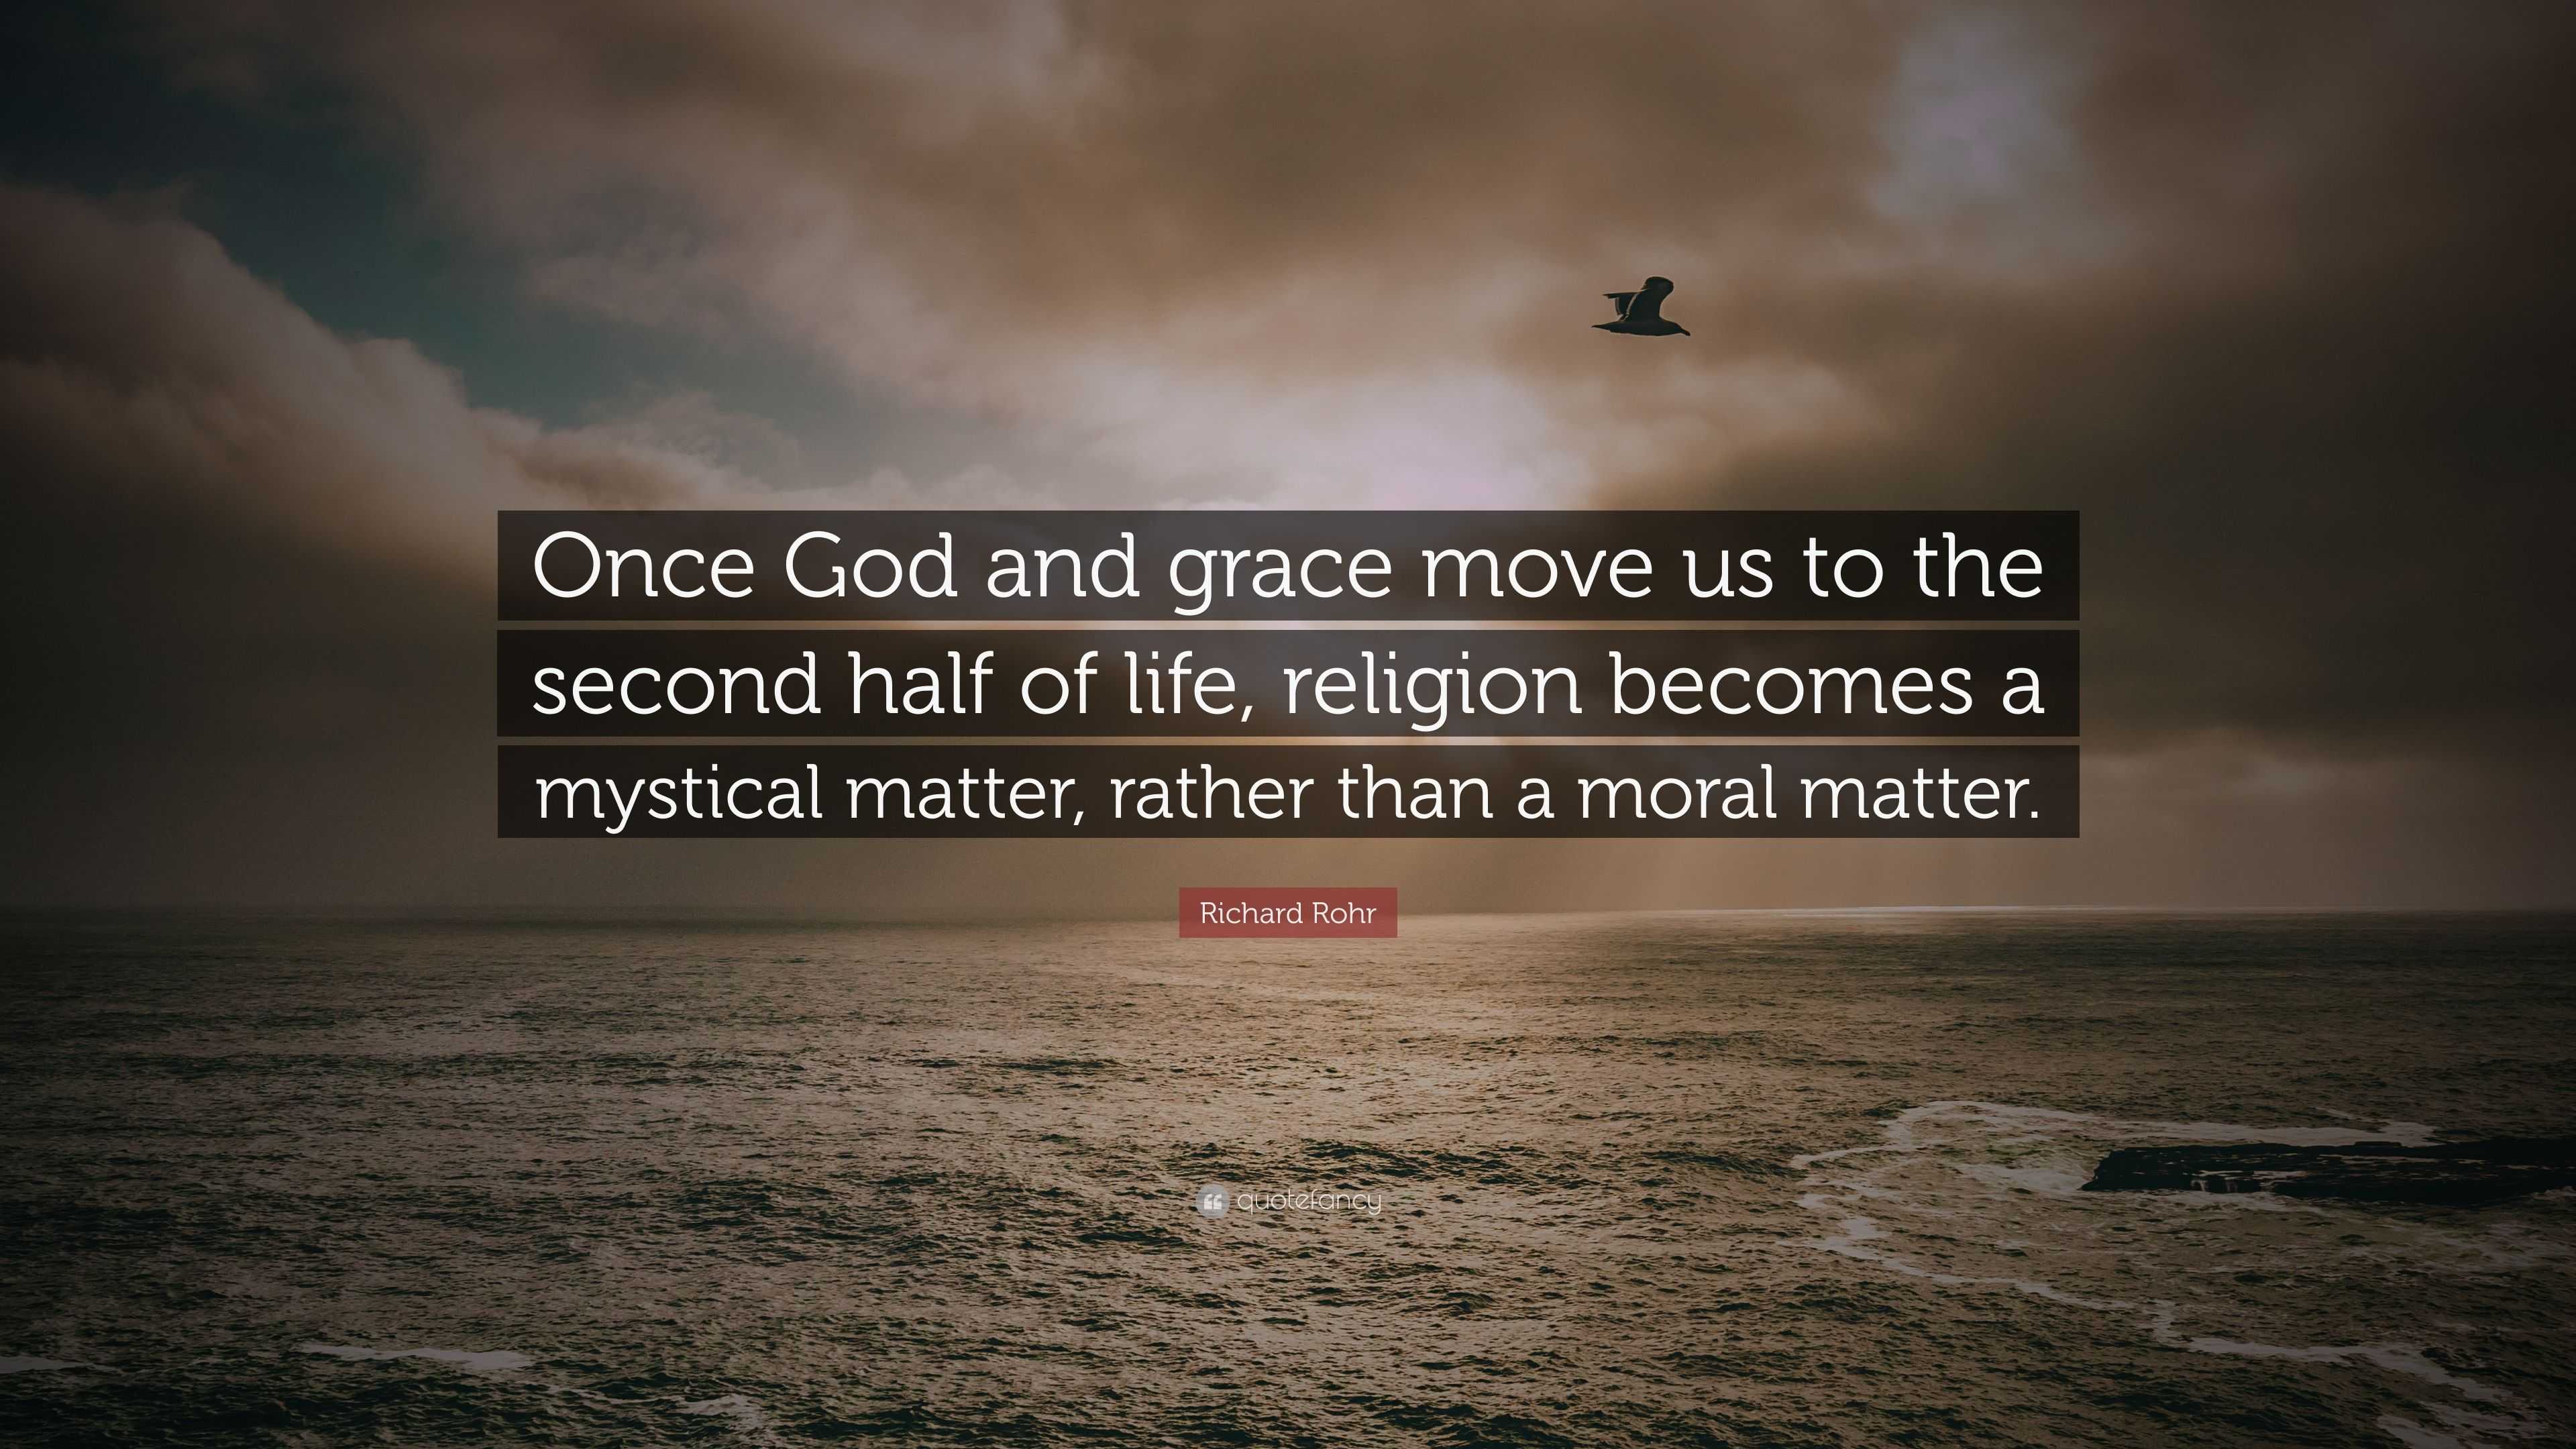 2257946 Richard Rohr Quote Once God and grace move us to the second half